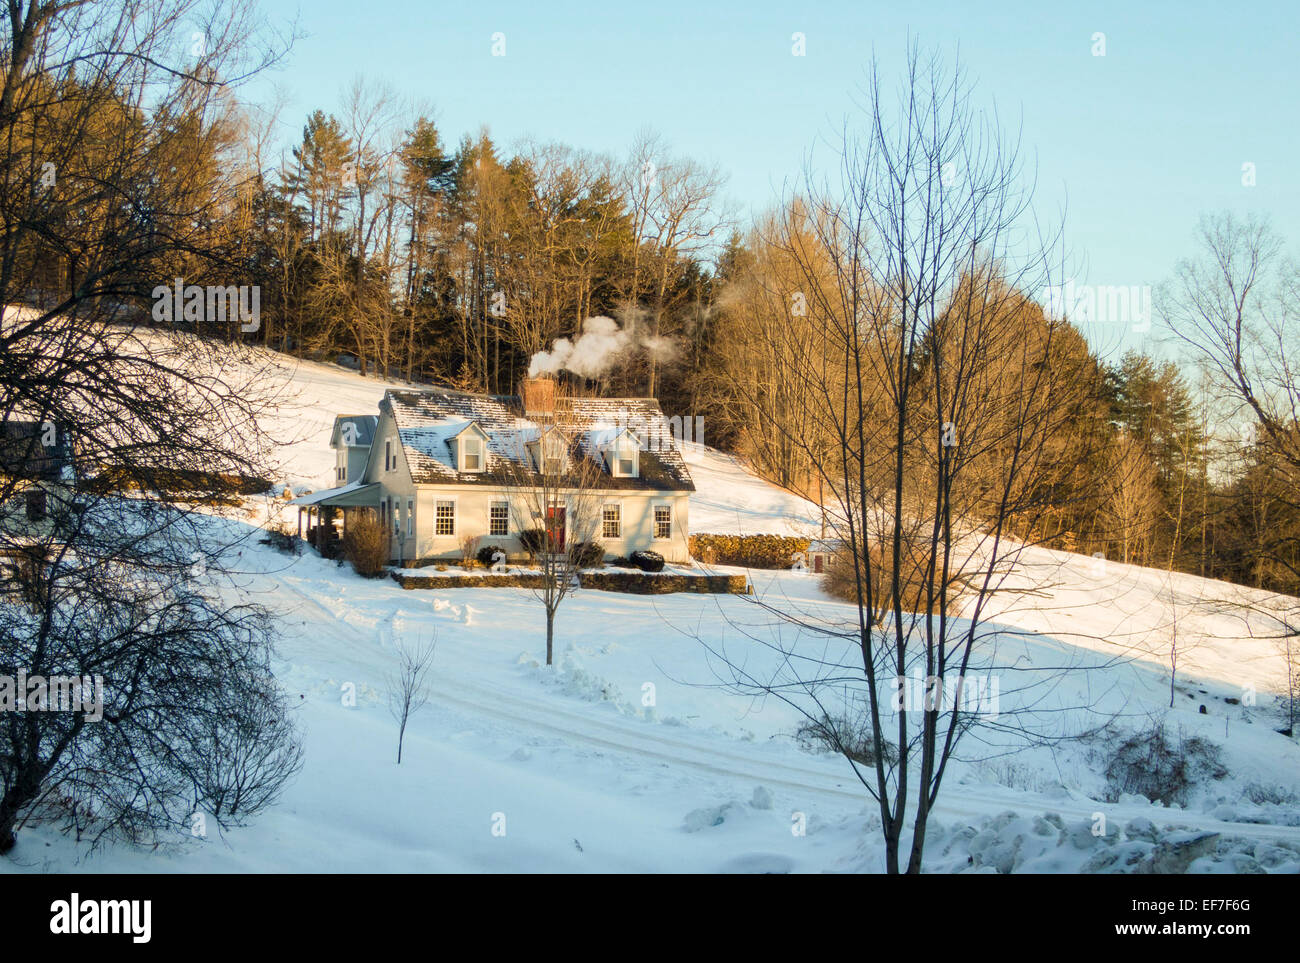 Winter scenic of a Cape-style, restored home with a smoking chimney in Vermont, United States of America. Stock Photo